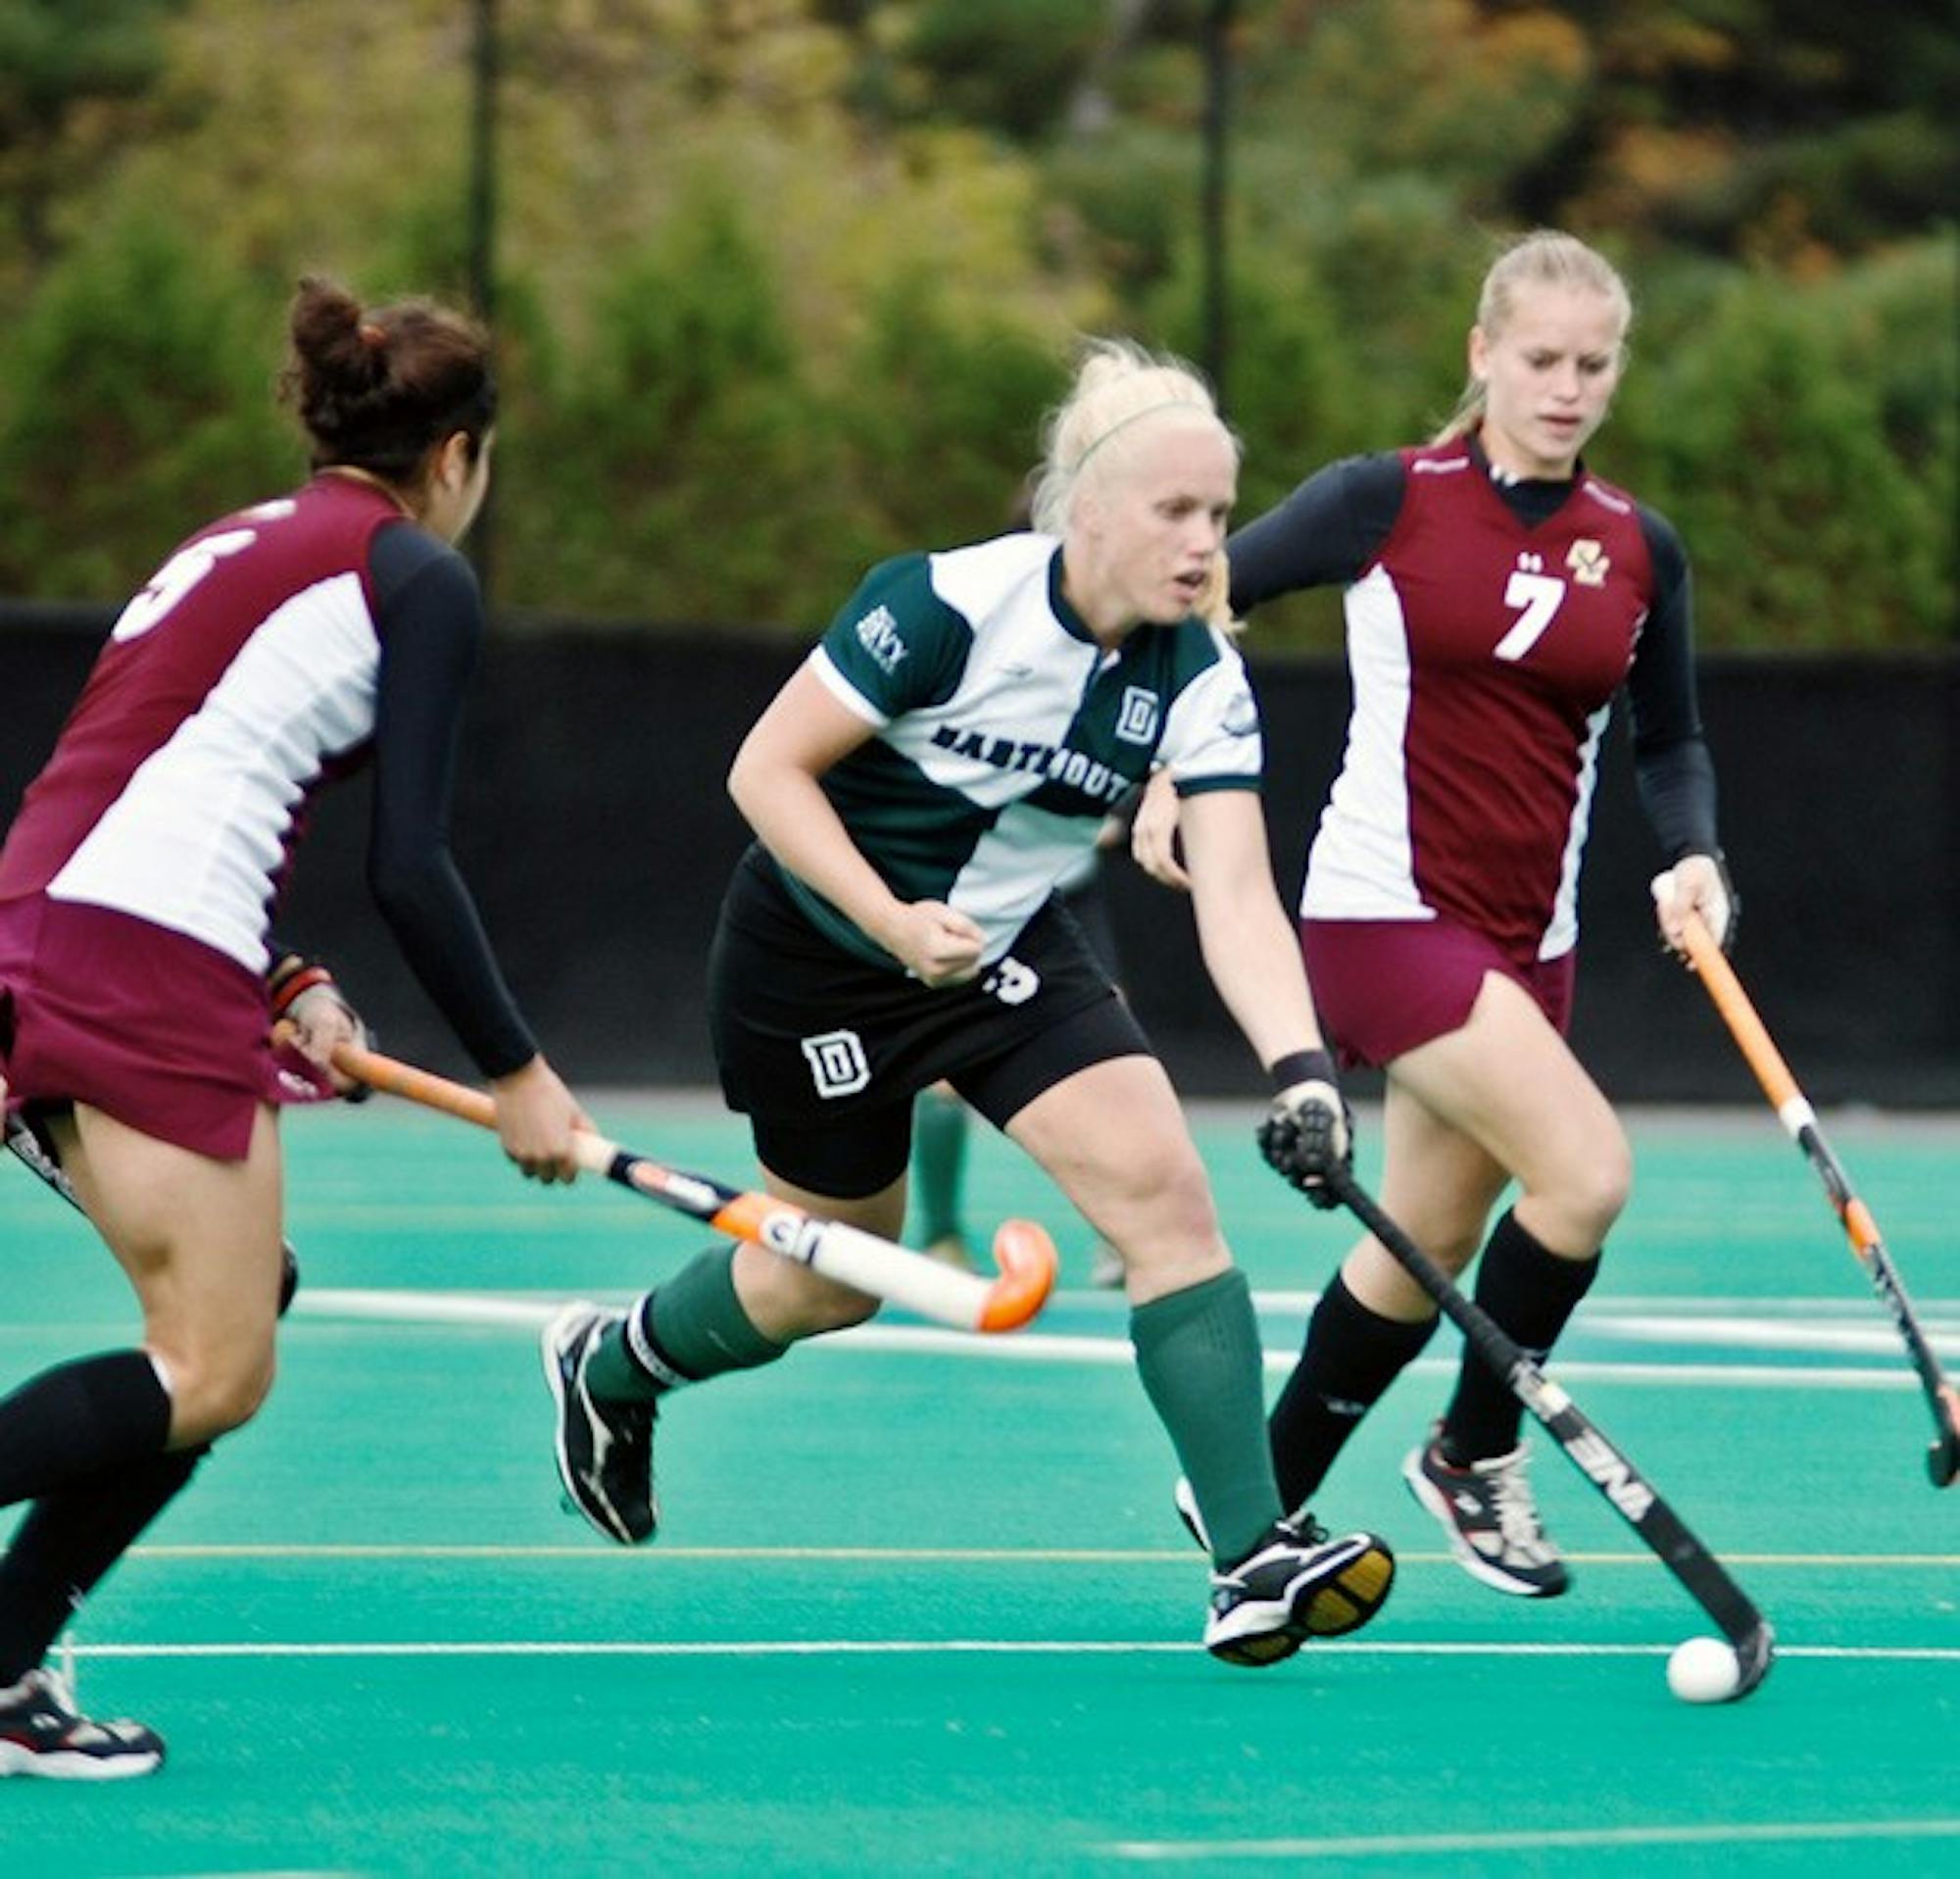 The Big Green field hockey team salvaged a weekend split by toppling Holy Cross on the road 2-1 on Sunday.